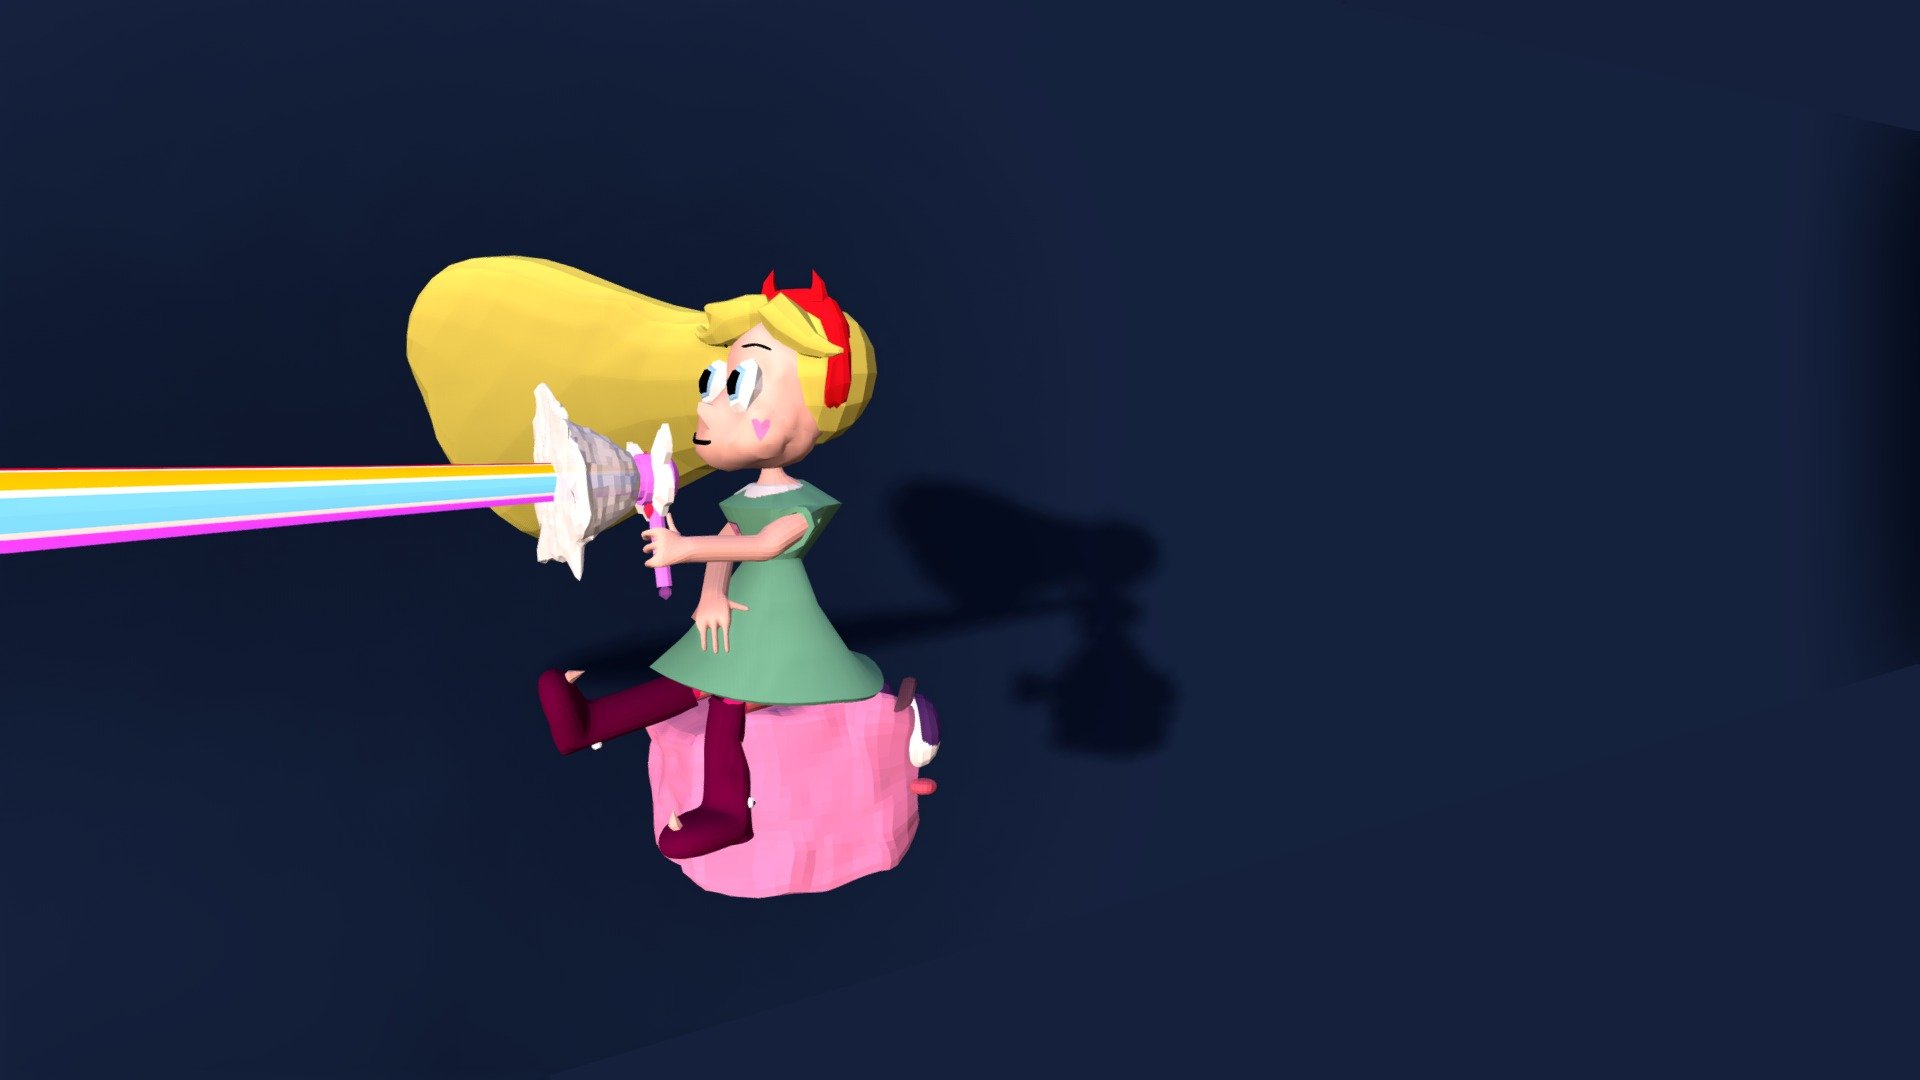 Star Butterfly Nyan Cat Animation